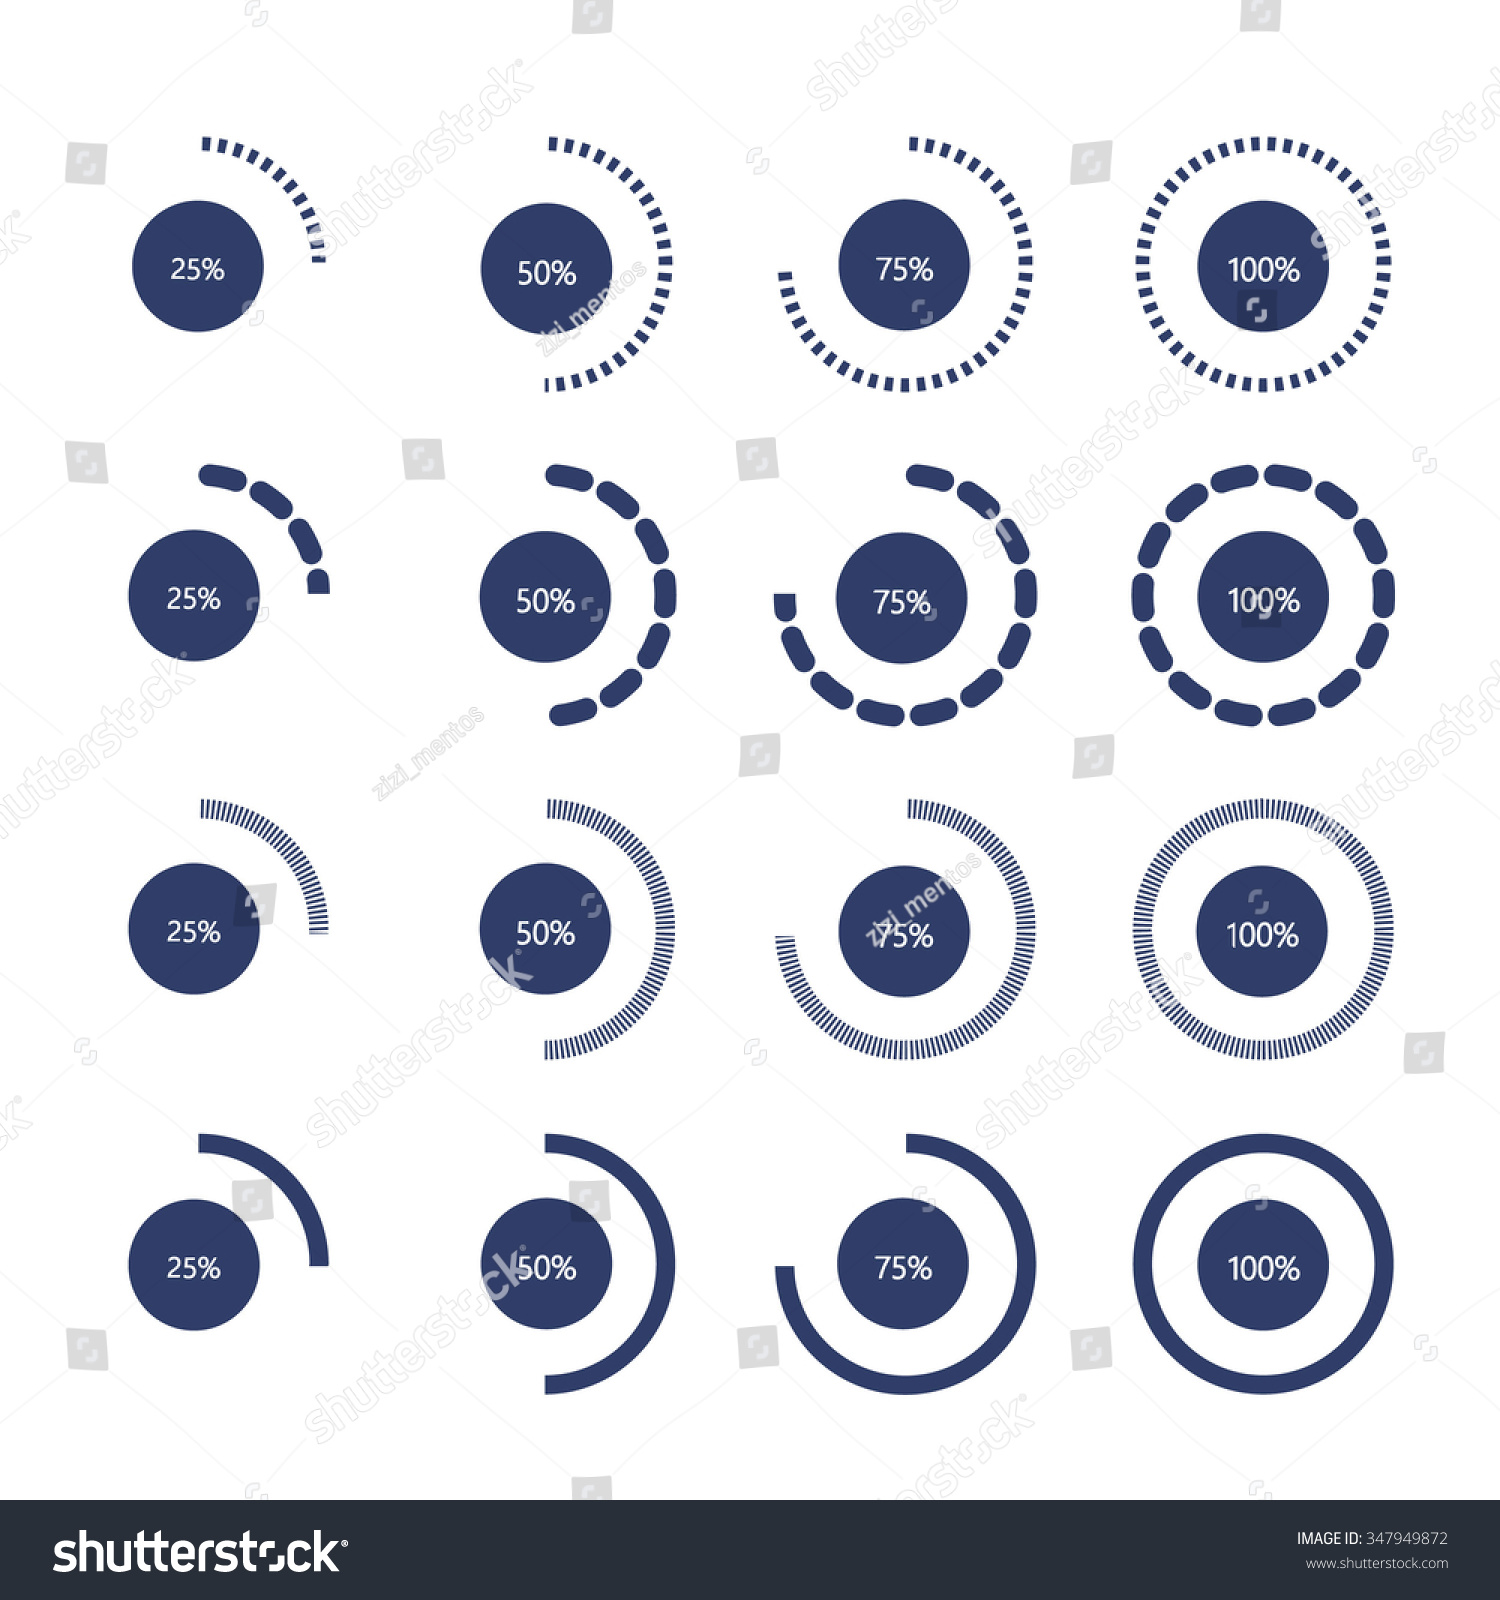 Loading And Buffering Icon. Flat Design Style. Royalty Free 